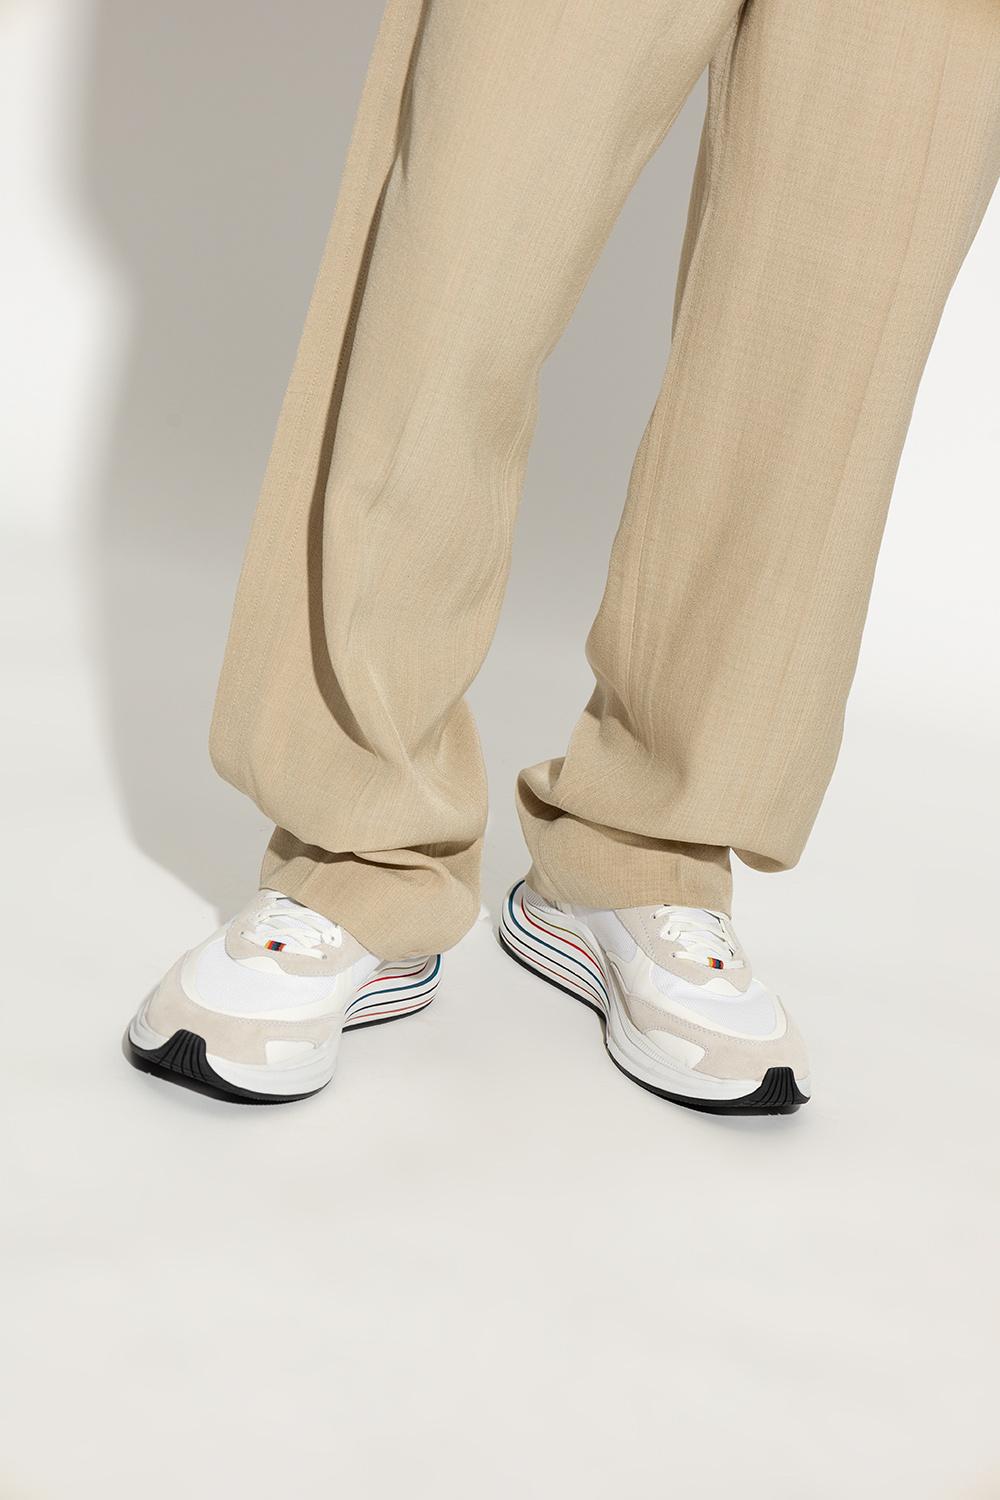 Paul Smith 'nagase' Sneakers in Natural for Men | Lyst